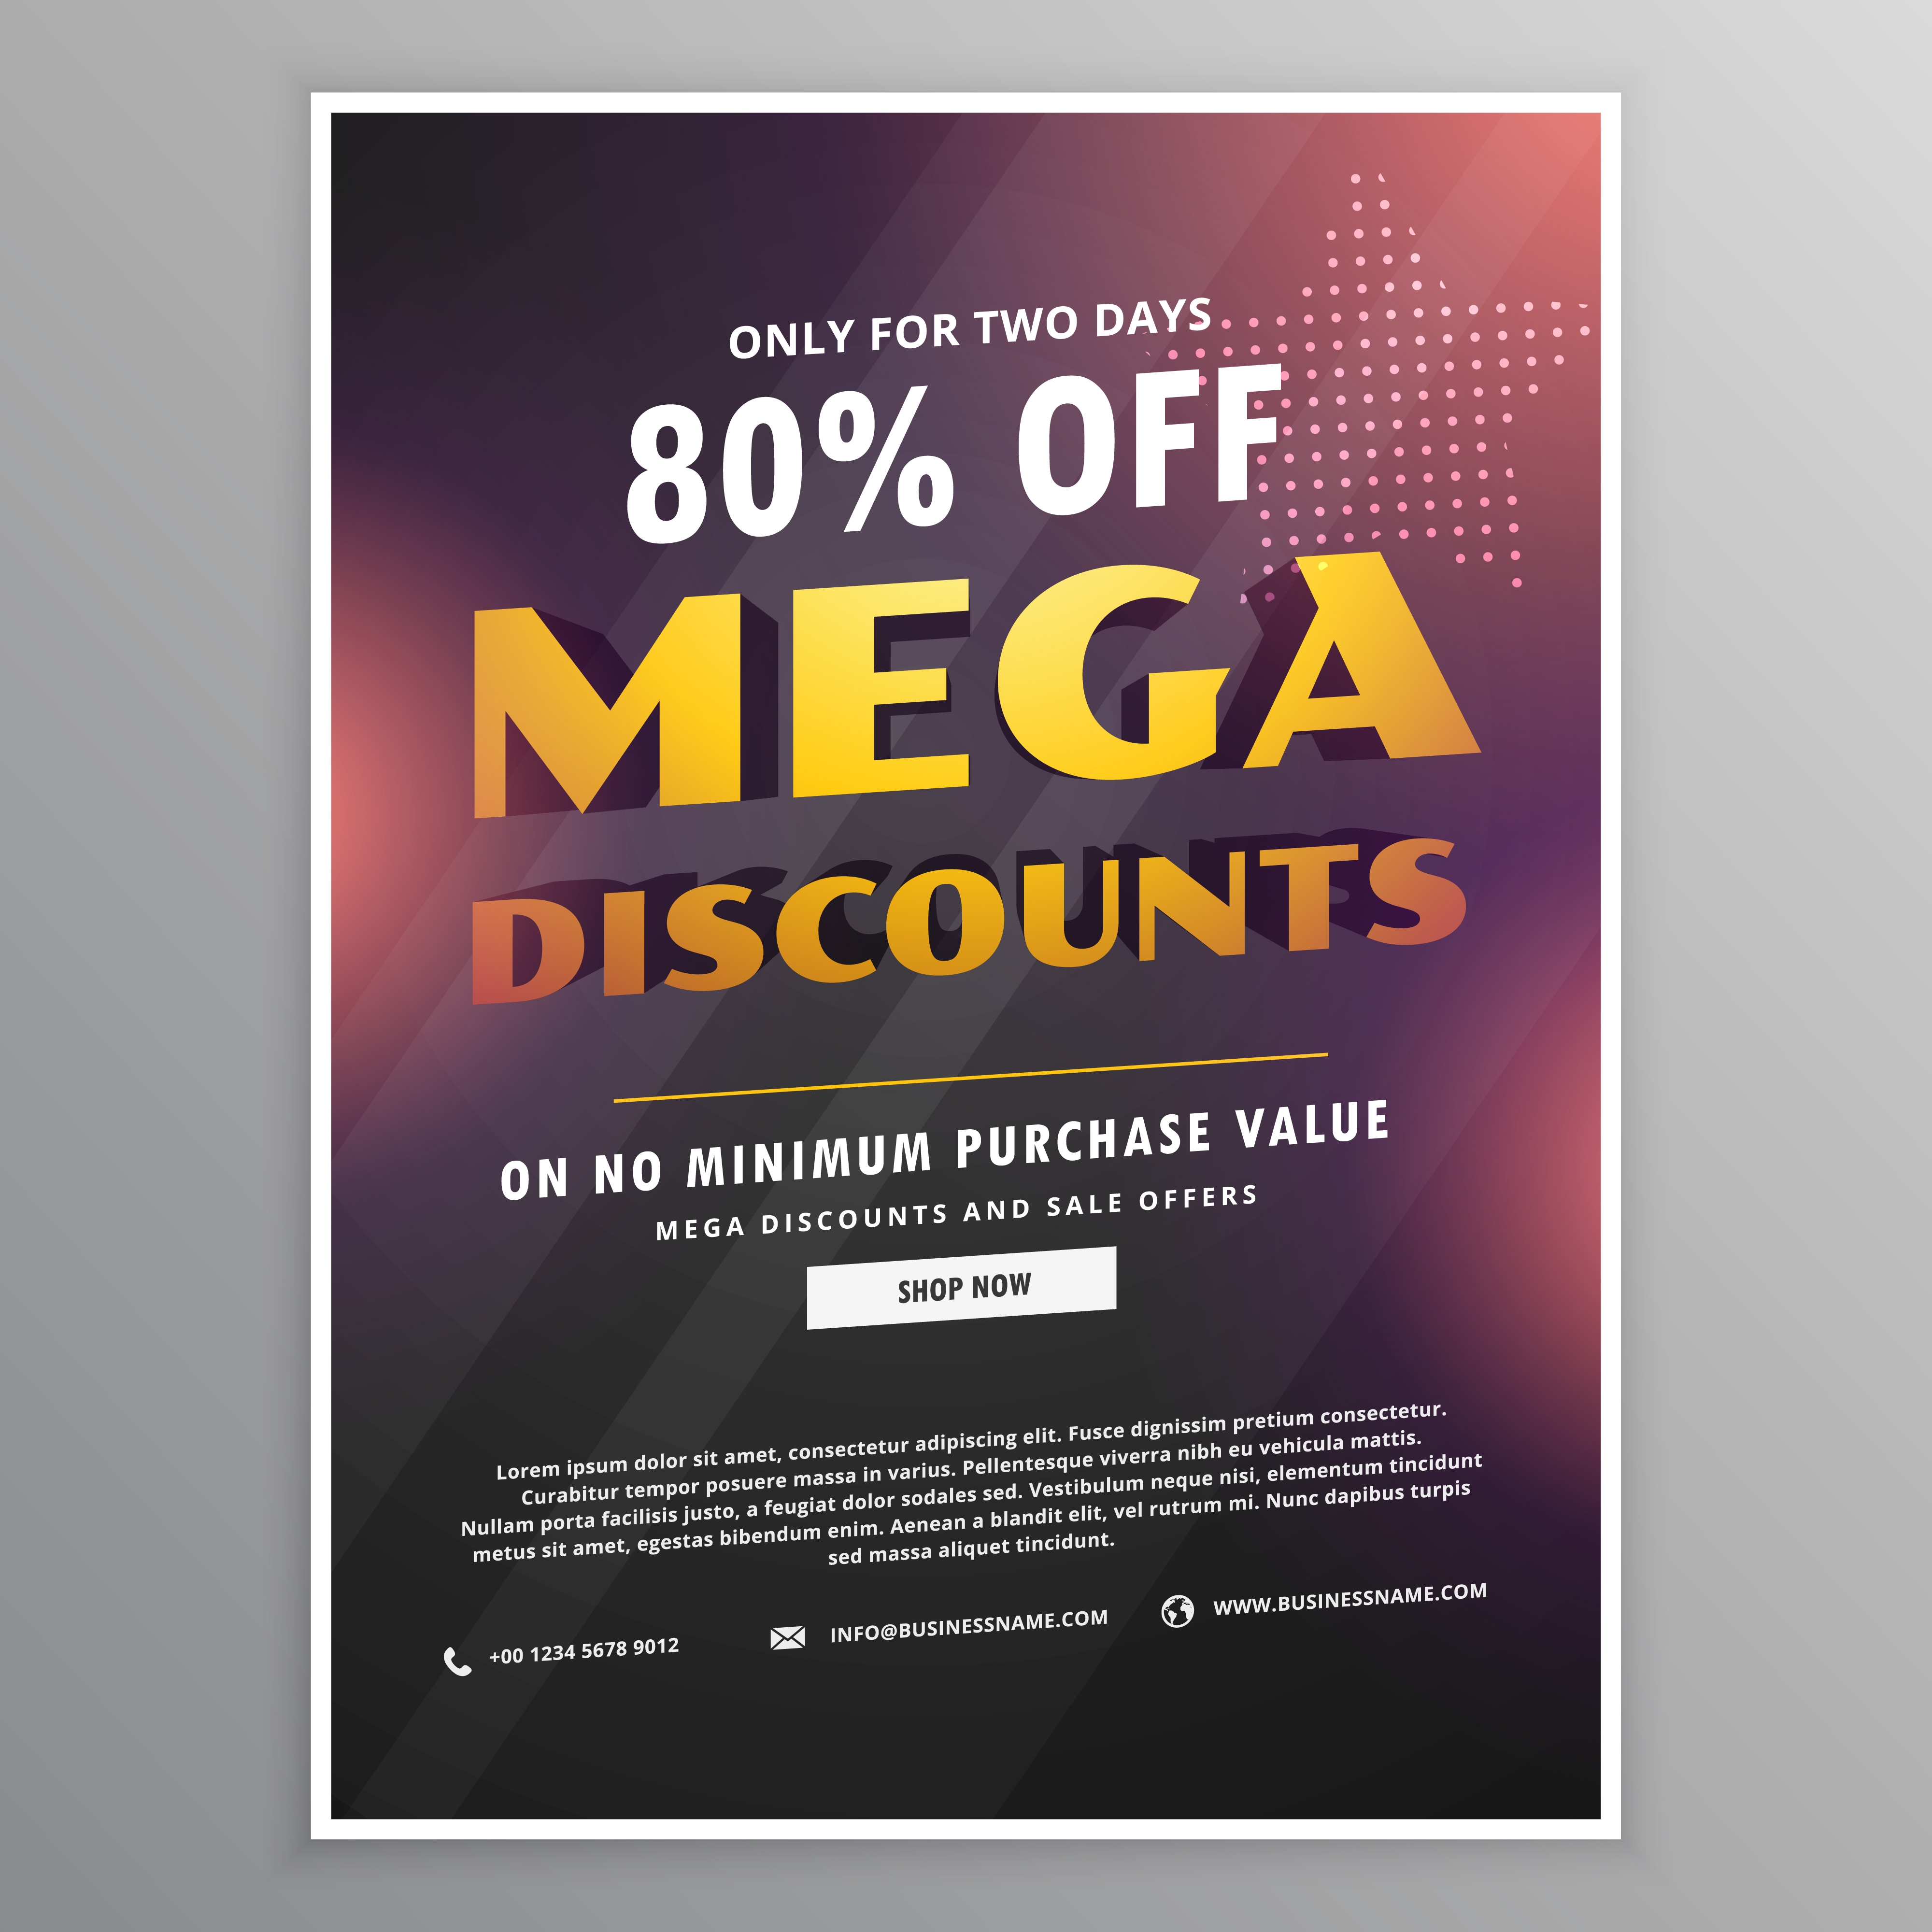 Promotional Offer Template